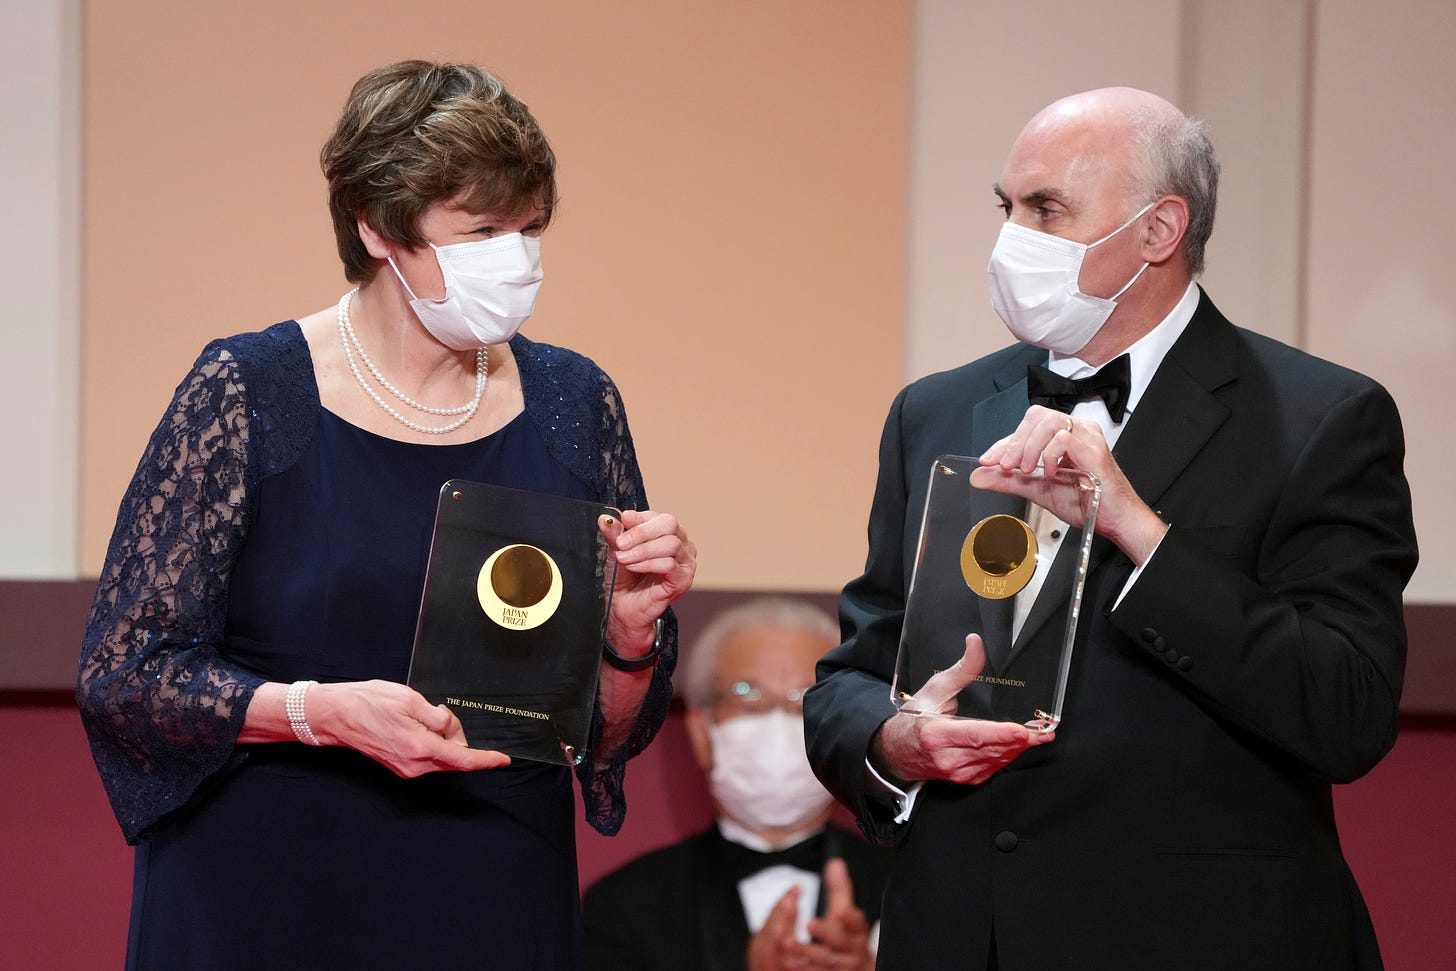 Japan Prize 2022 laureates Hungarian-American biochemist Katalin Kariko, left, and American physician-scientist Drew Weissman, right, pose with their trophies during the Japan Prize presentation ceremony Wednesday, April 13, 2022, in Tokyo. 